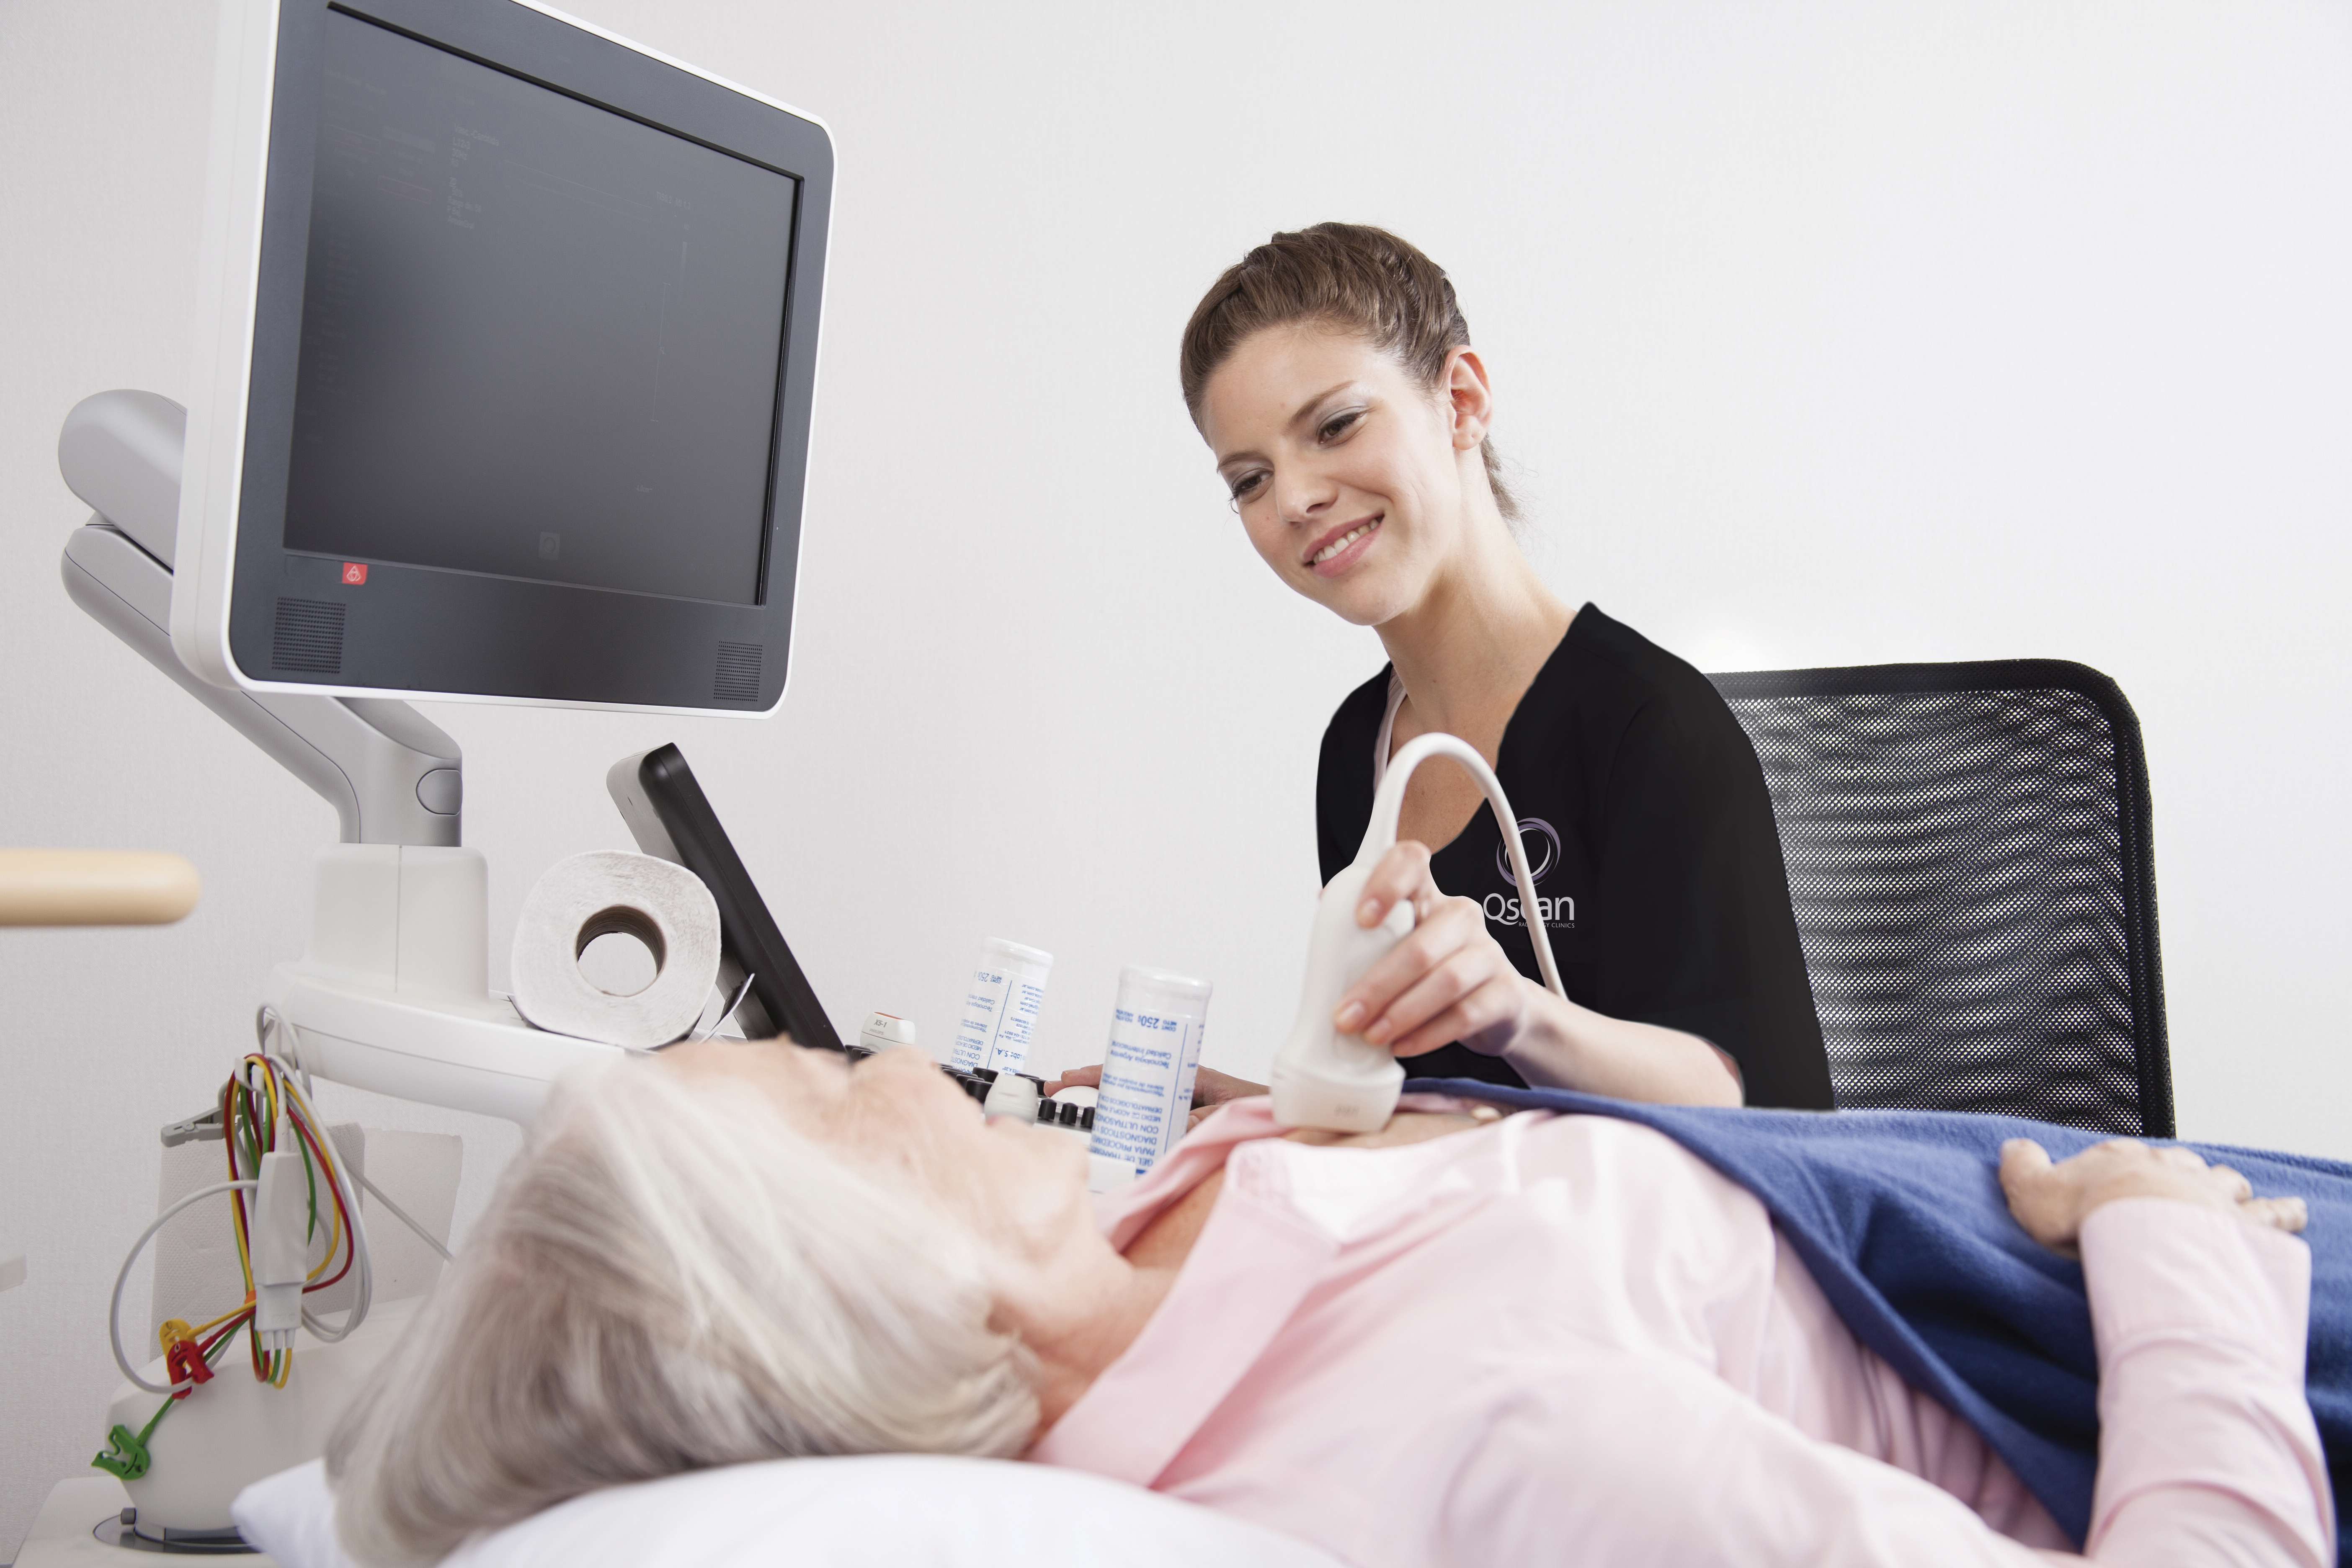 Qscan Redcliffe introduce Echo Ultrasound service